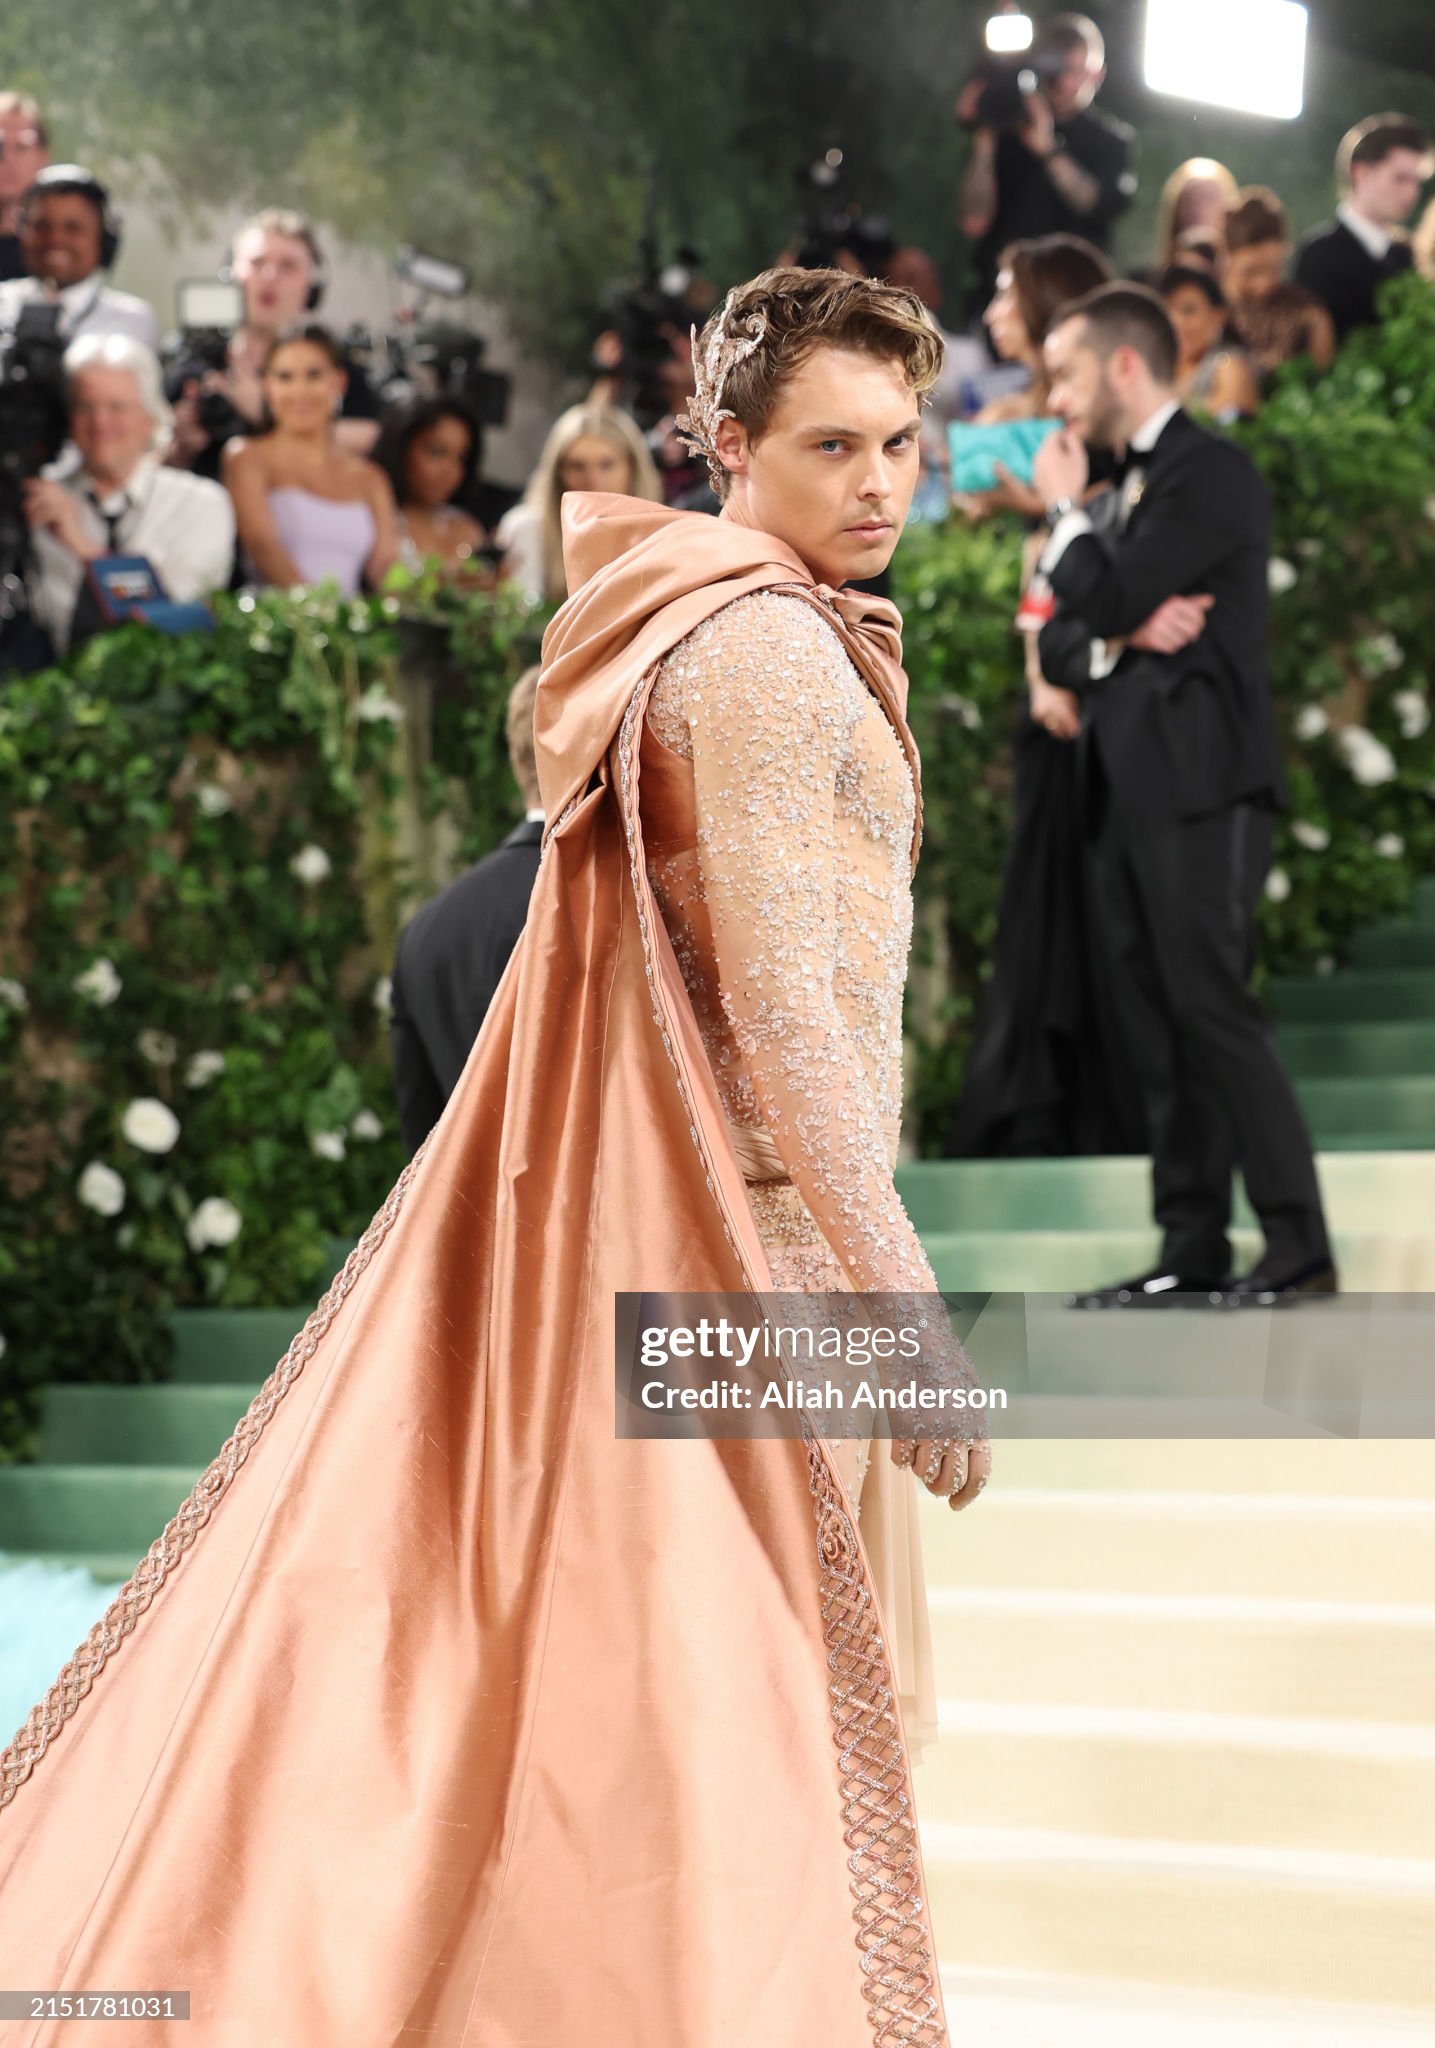 gettyimages-2151781031-2048x2048.jpg